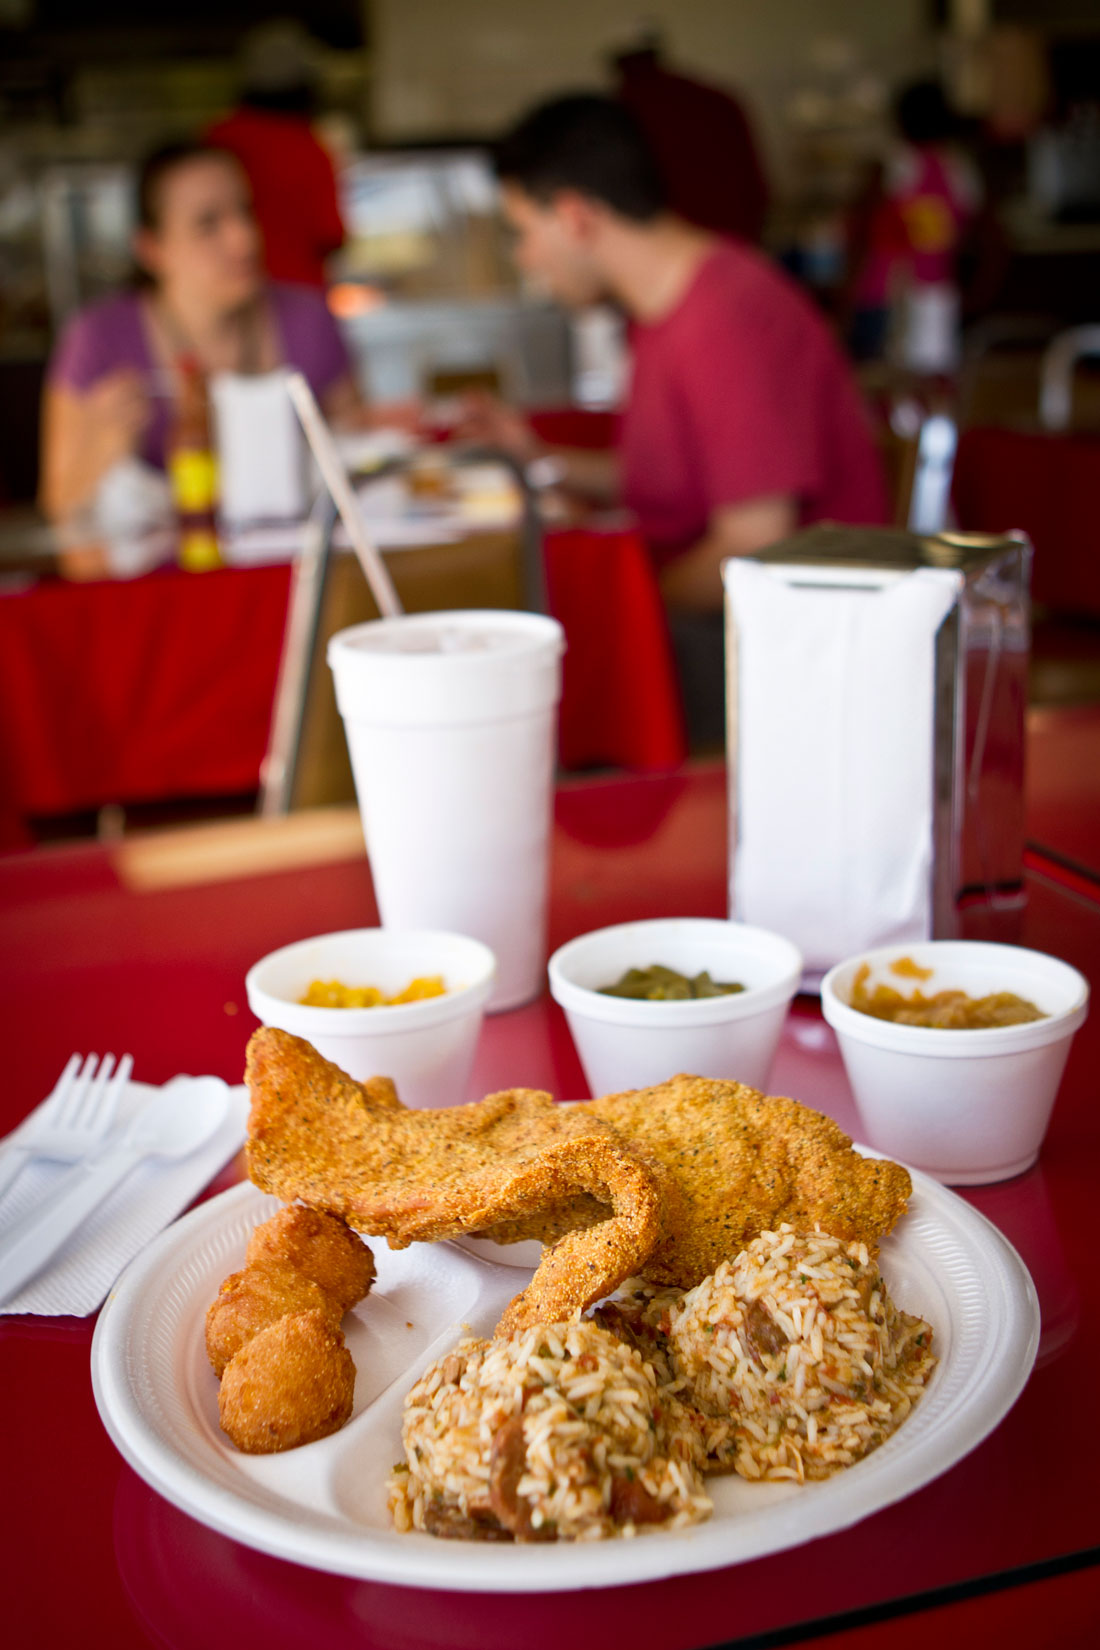 Fried fish and jambalaya are staples at Damian’s. Jesus A. Robles